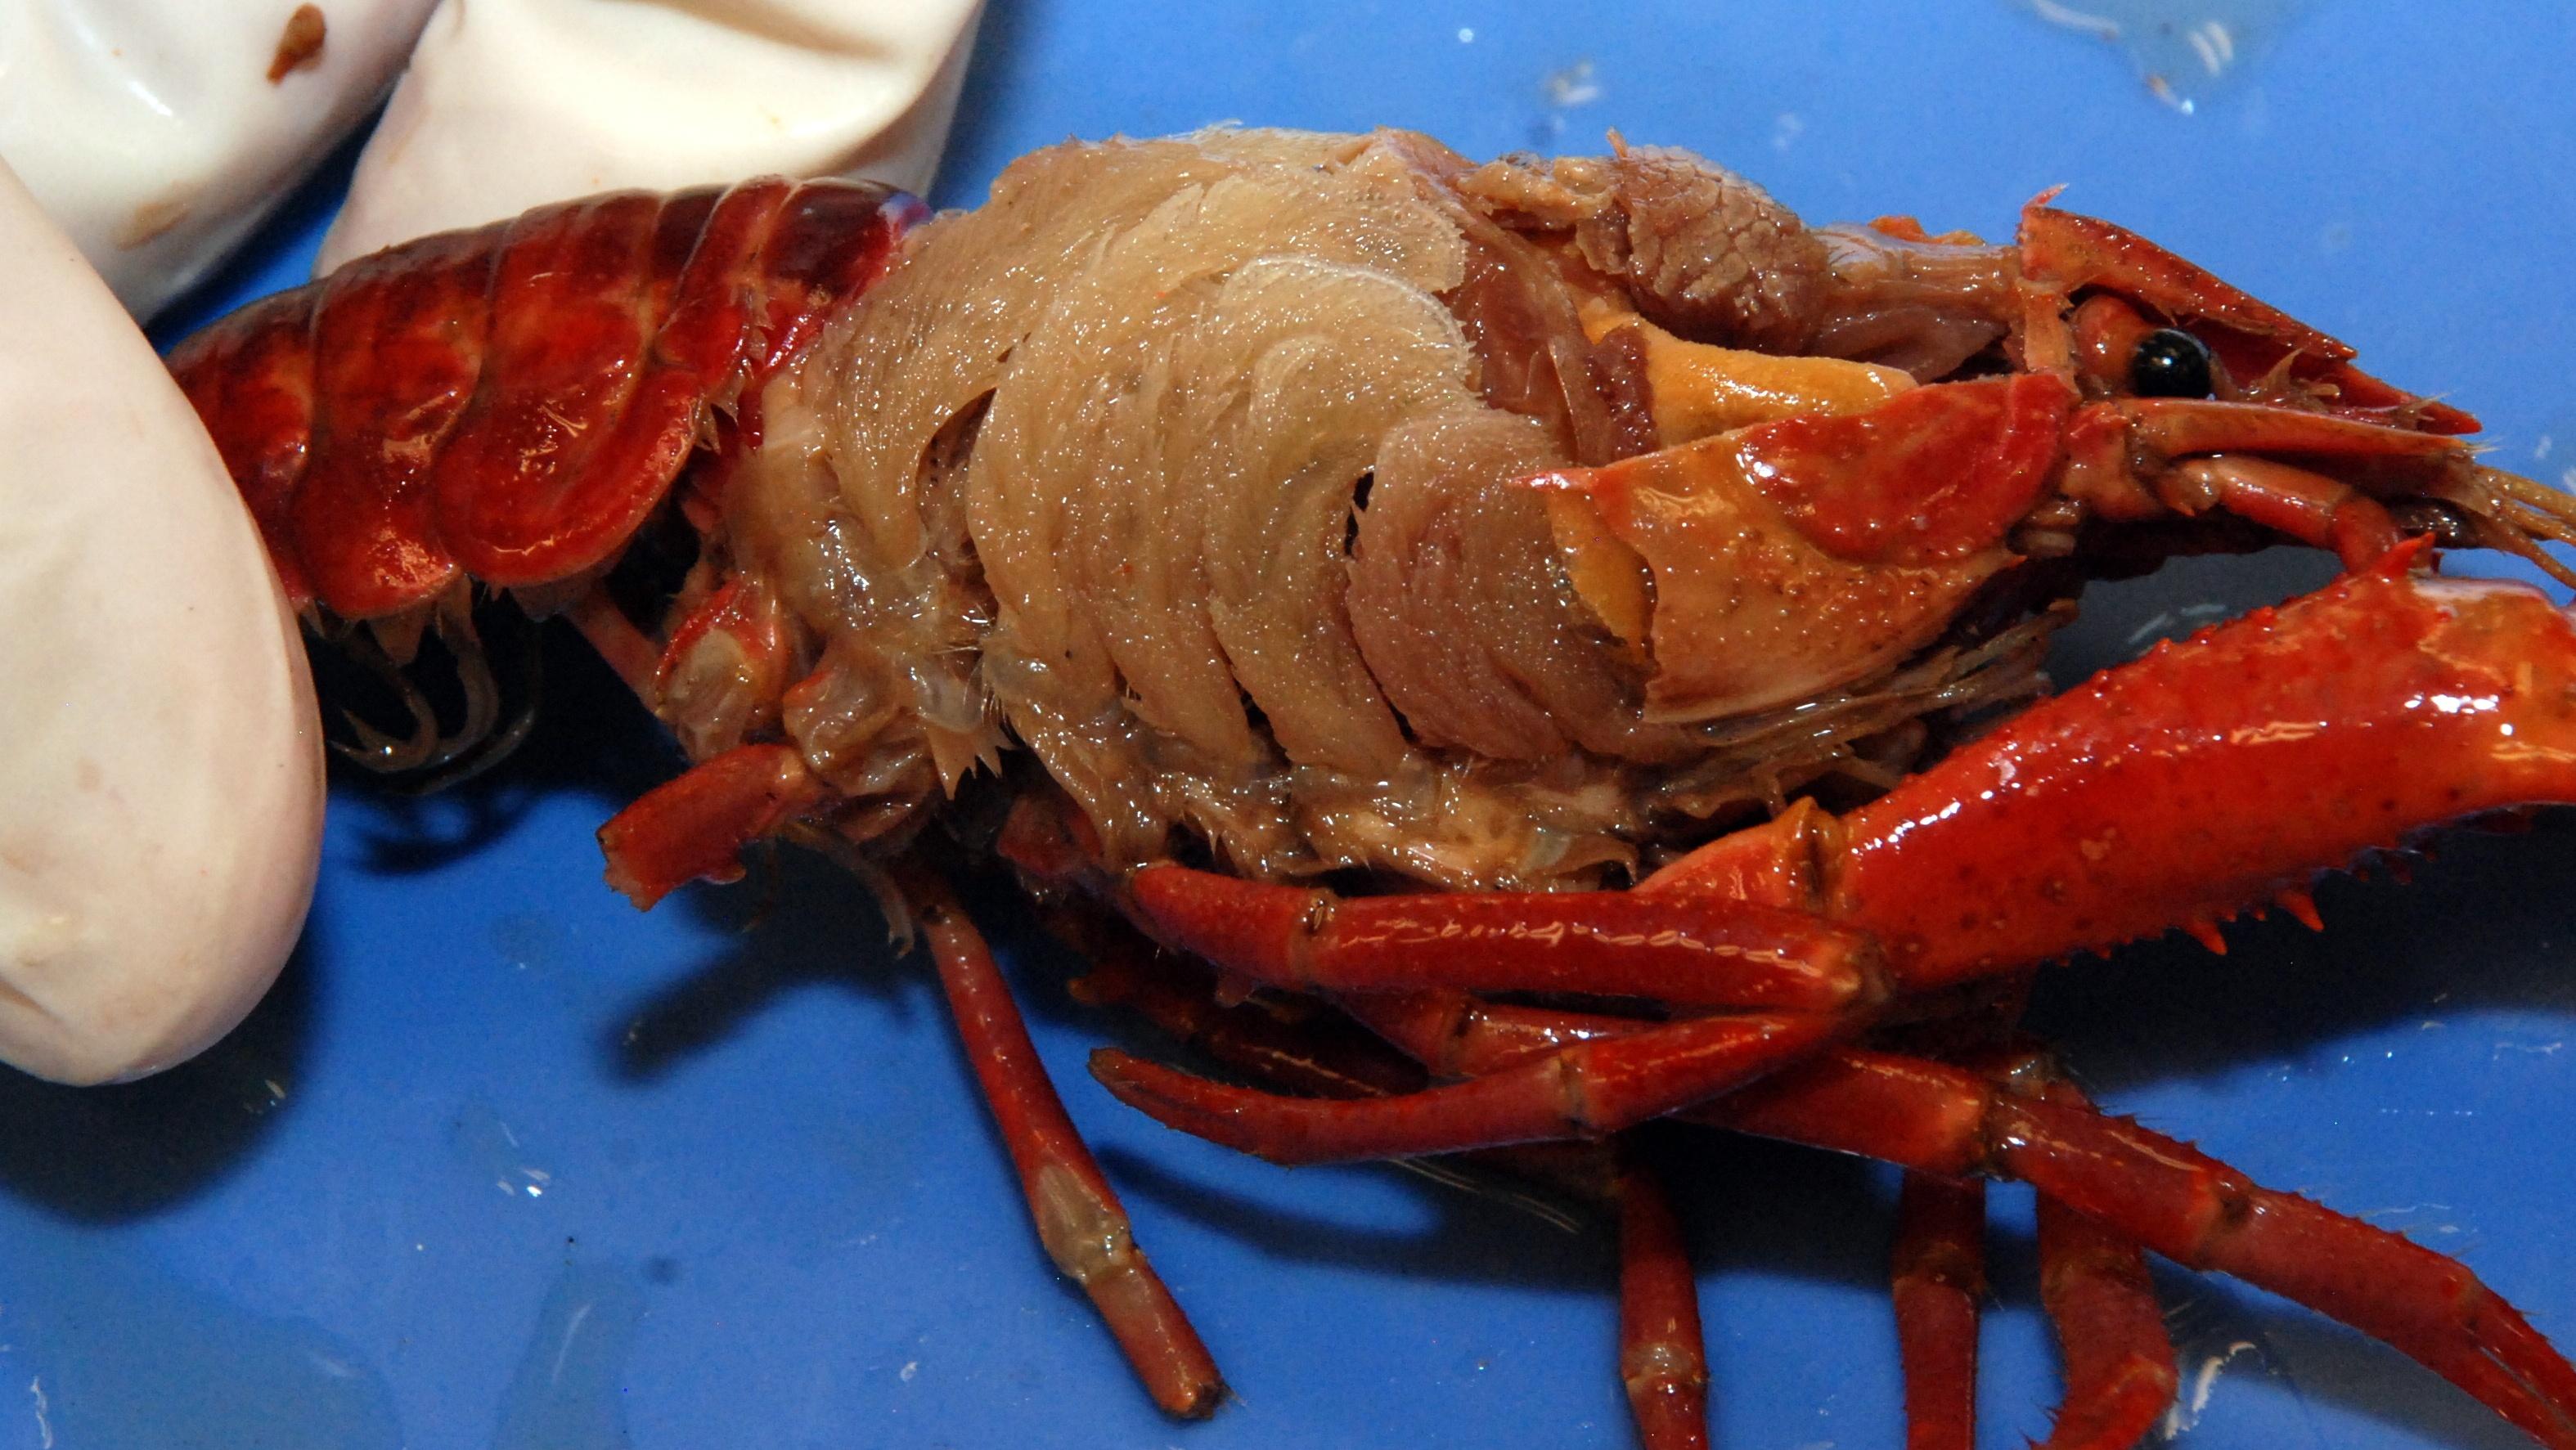 dissection-101-crayfish-dissection-lesson-plan-pbs-learningmedia